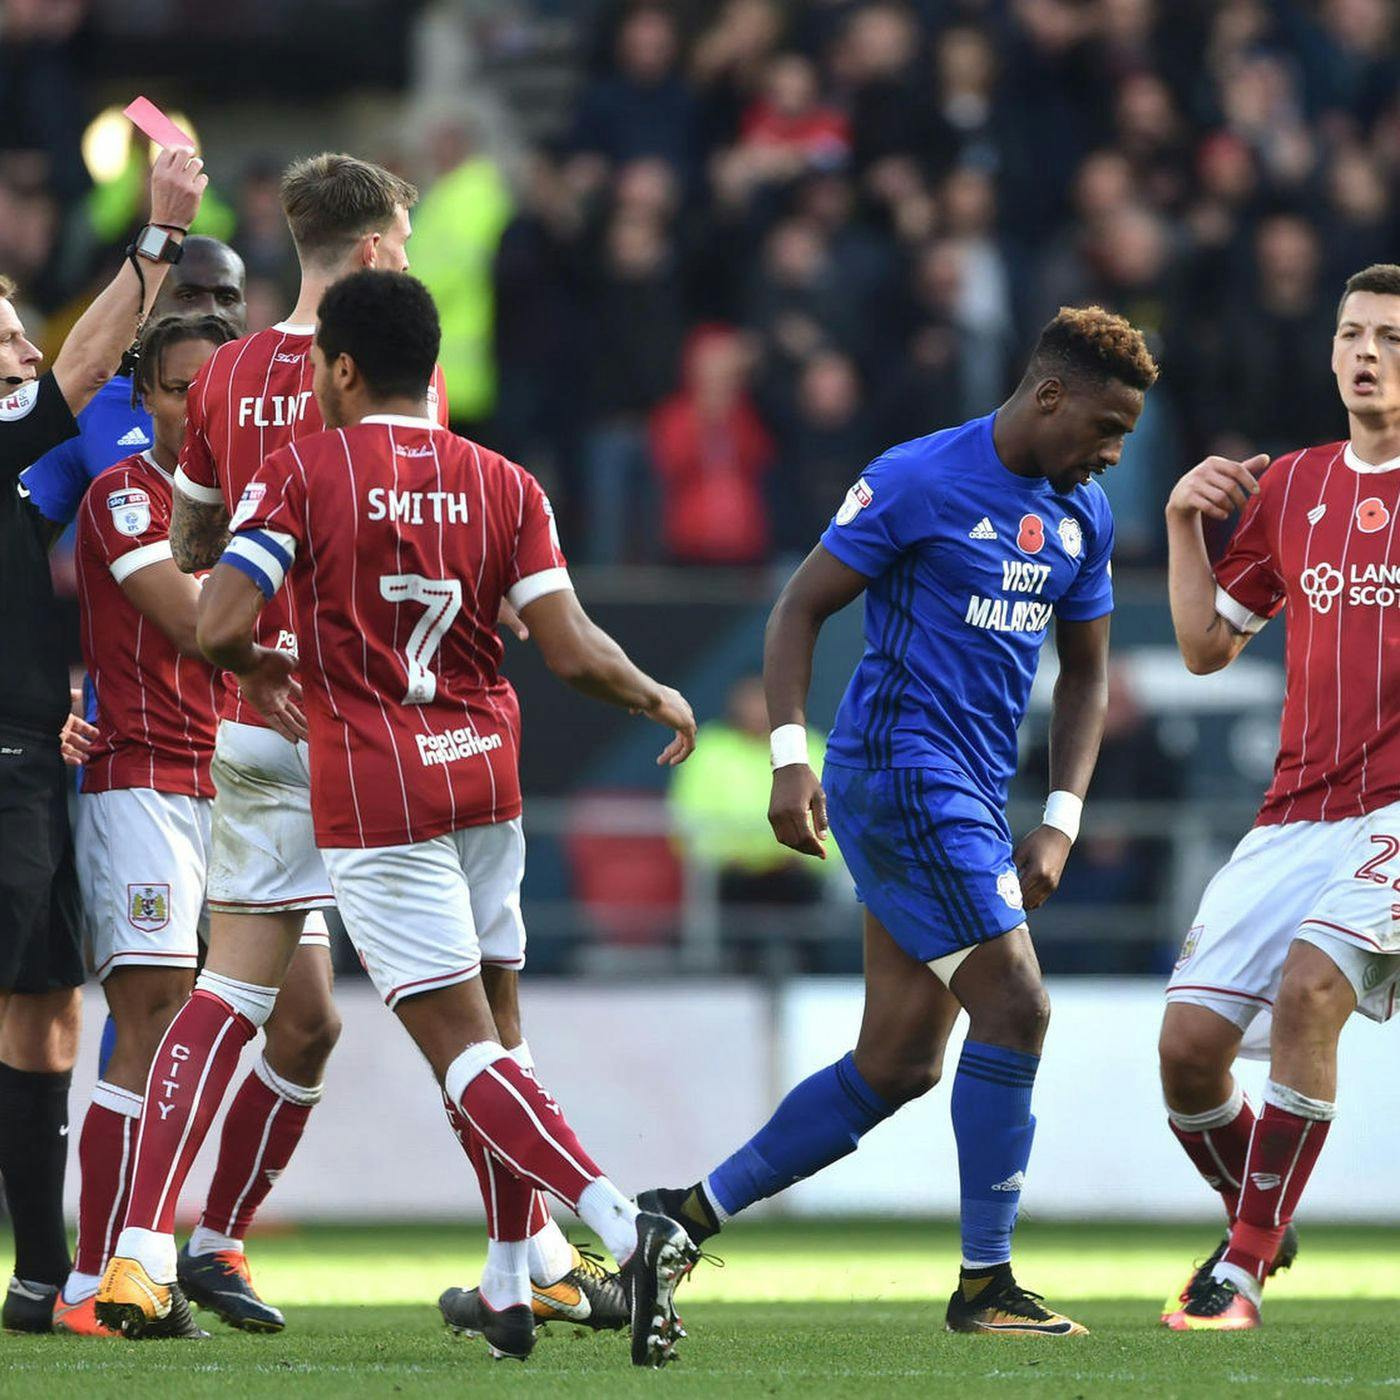 ’Warnock’s reaction to Bogle red card was refreshing’